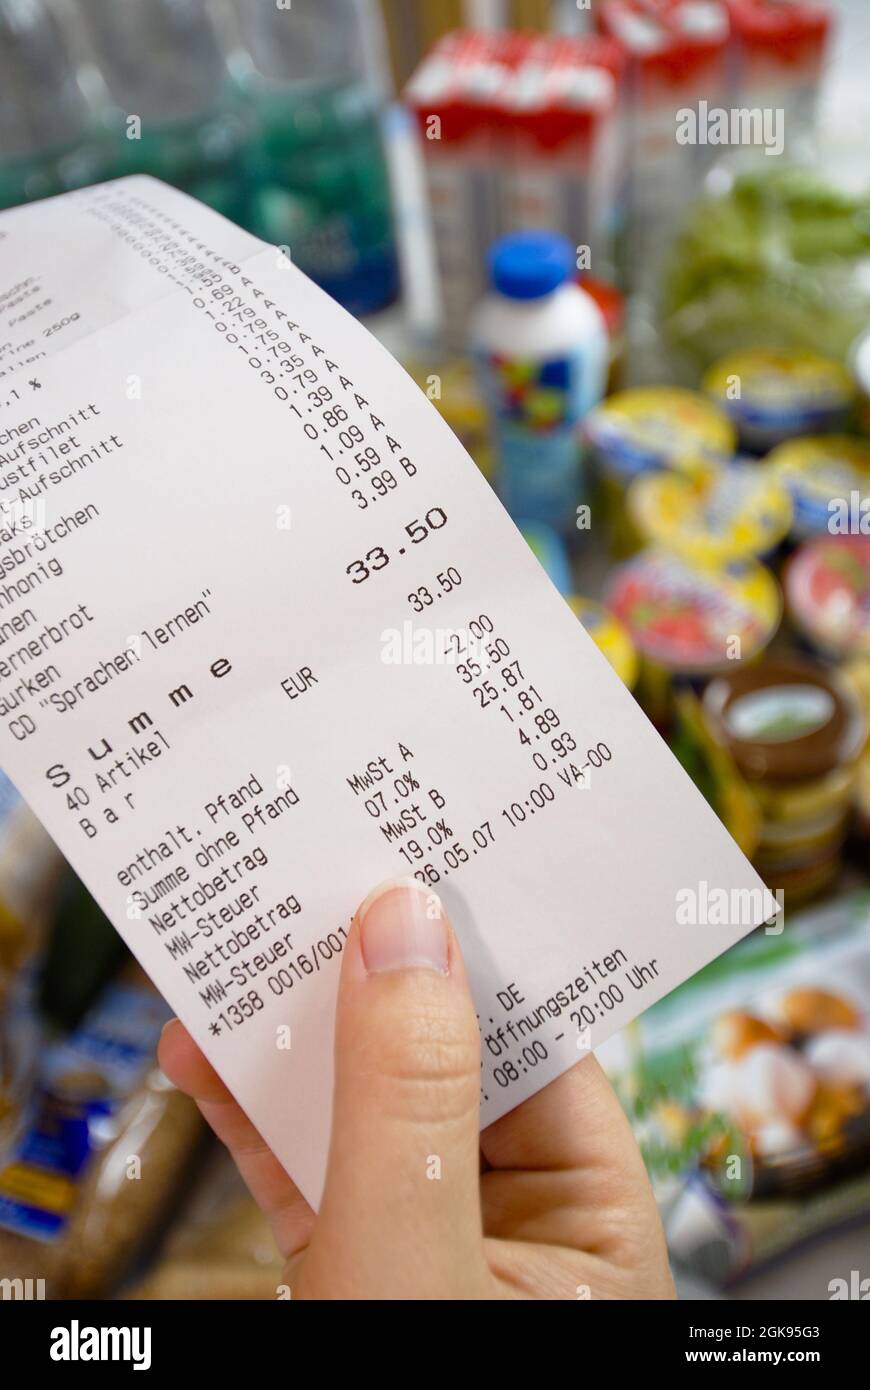 receipt in a hand, Germany Stock Photo